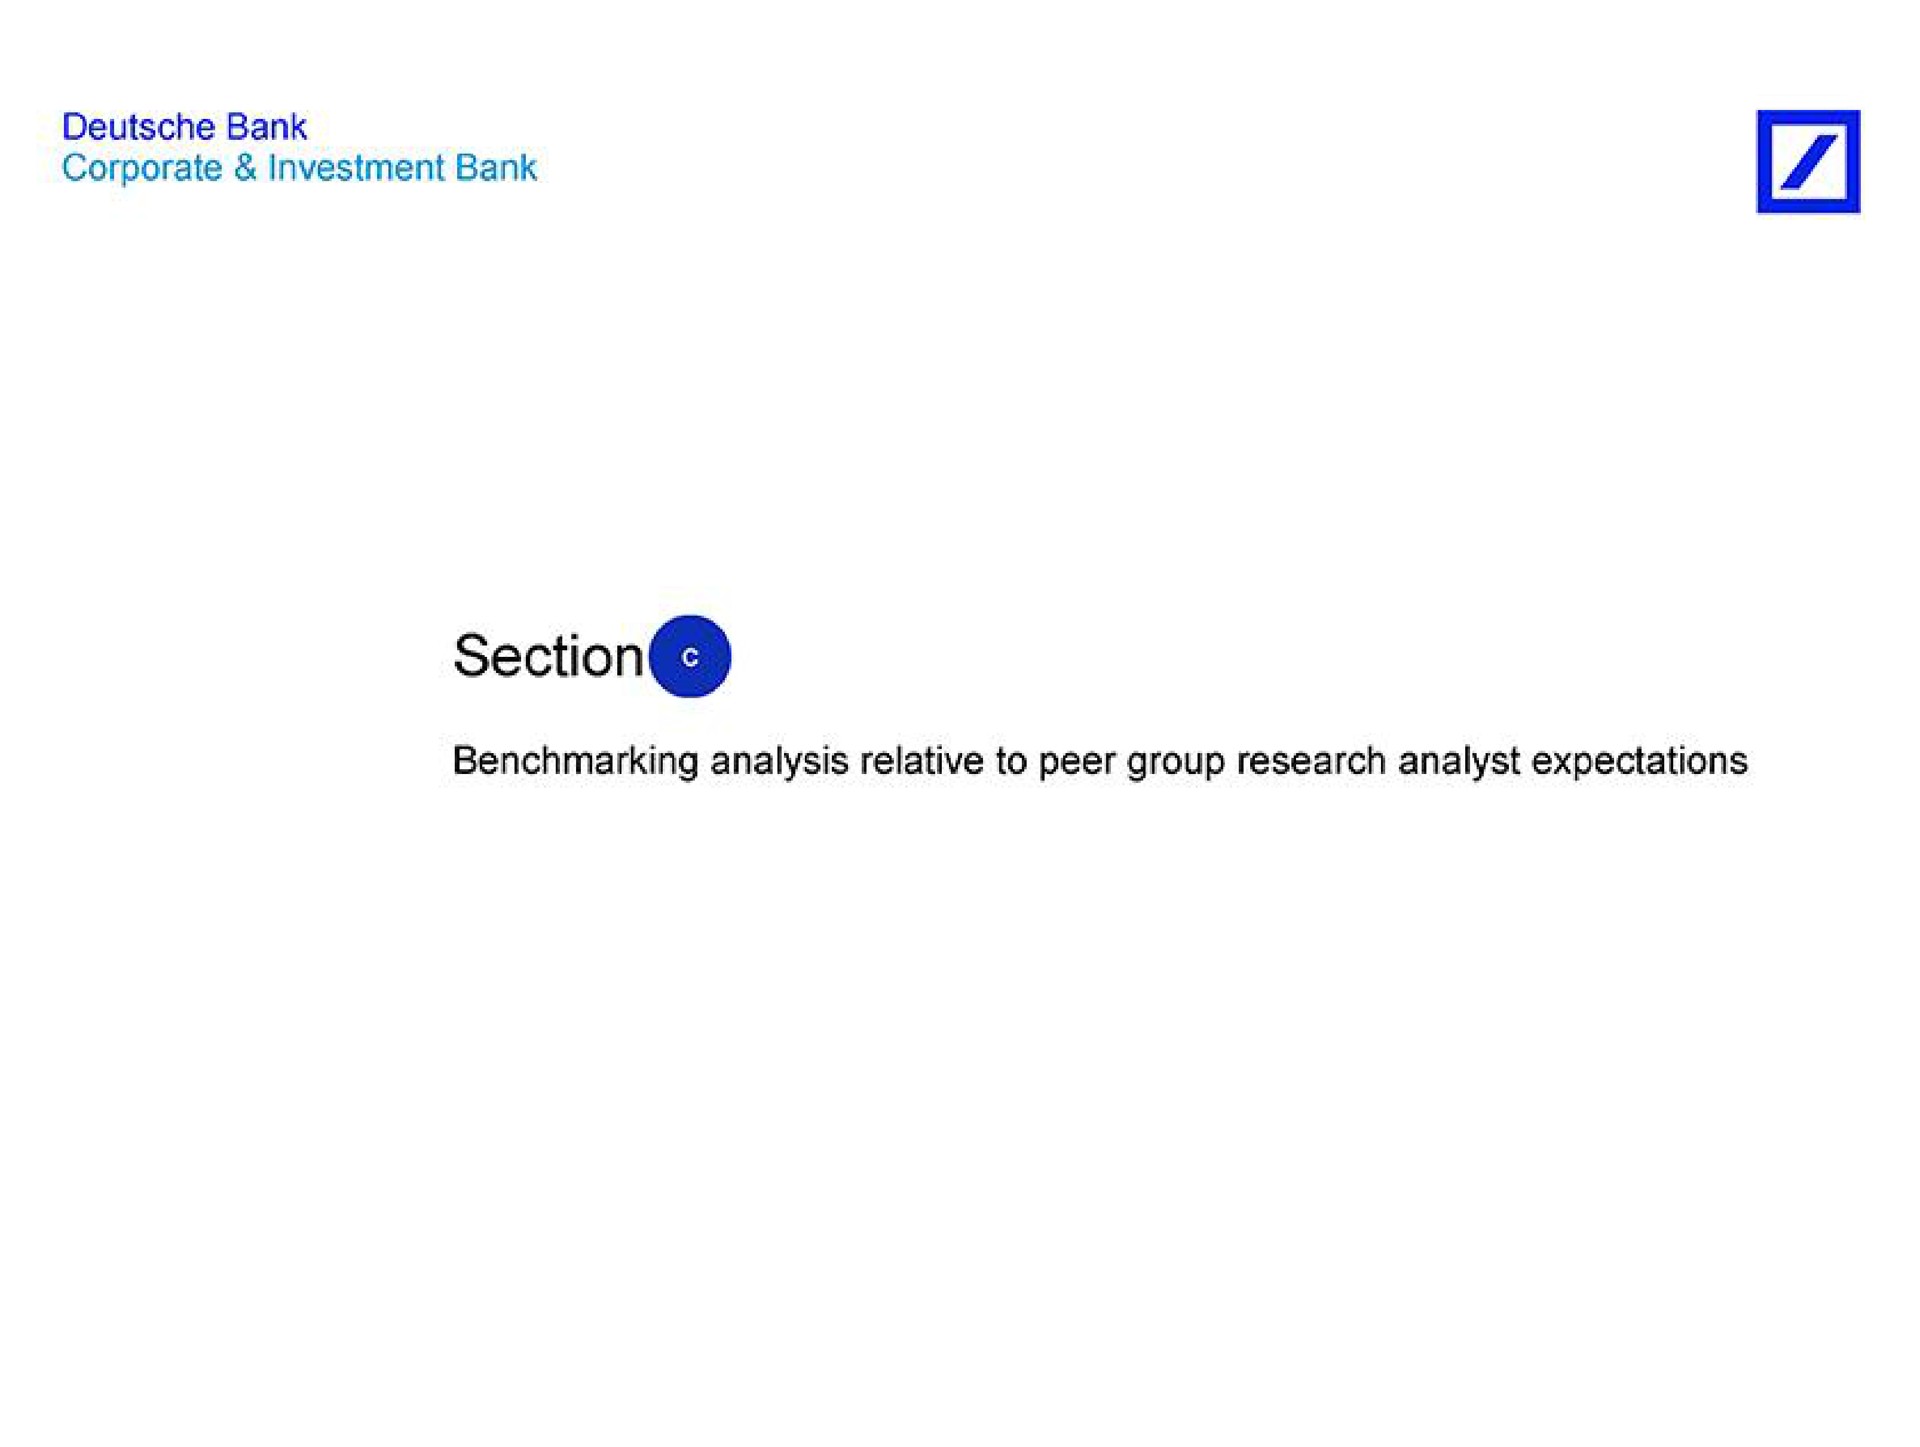 section analysis relative to peer group research analyst expectations | Deutsche Bank